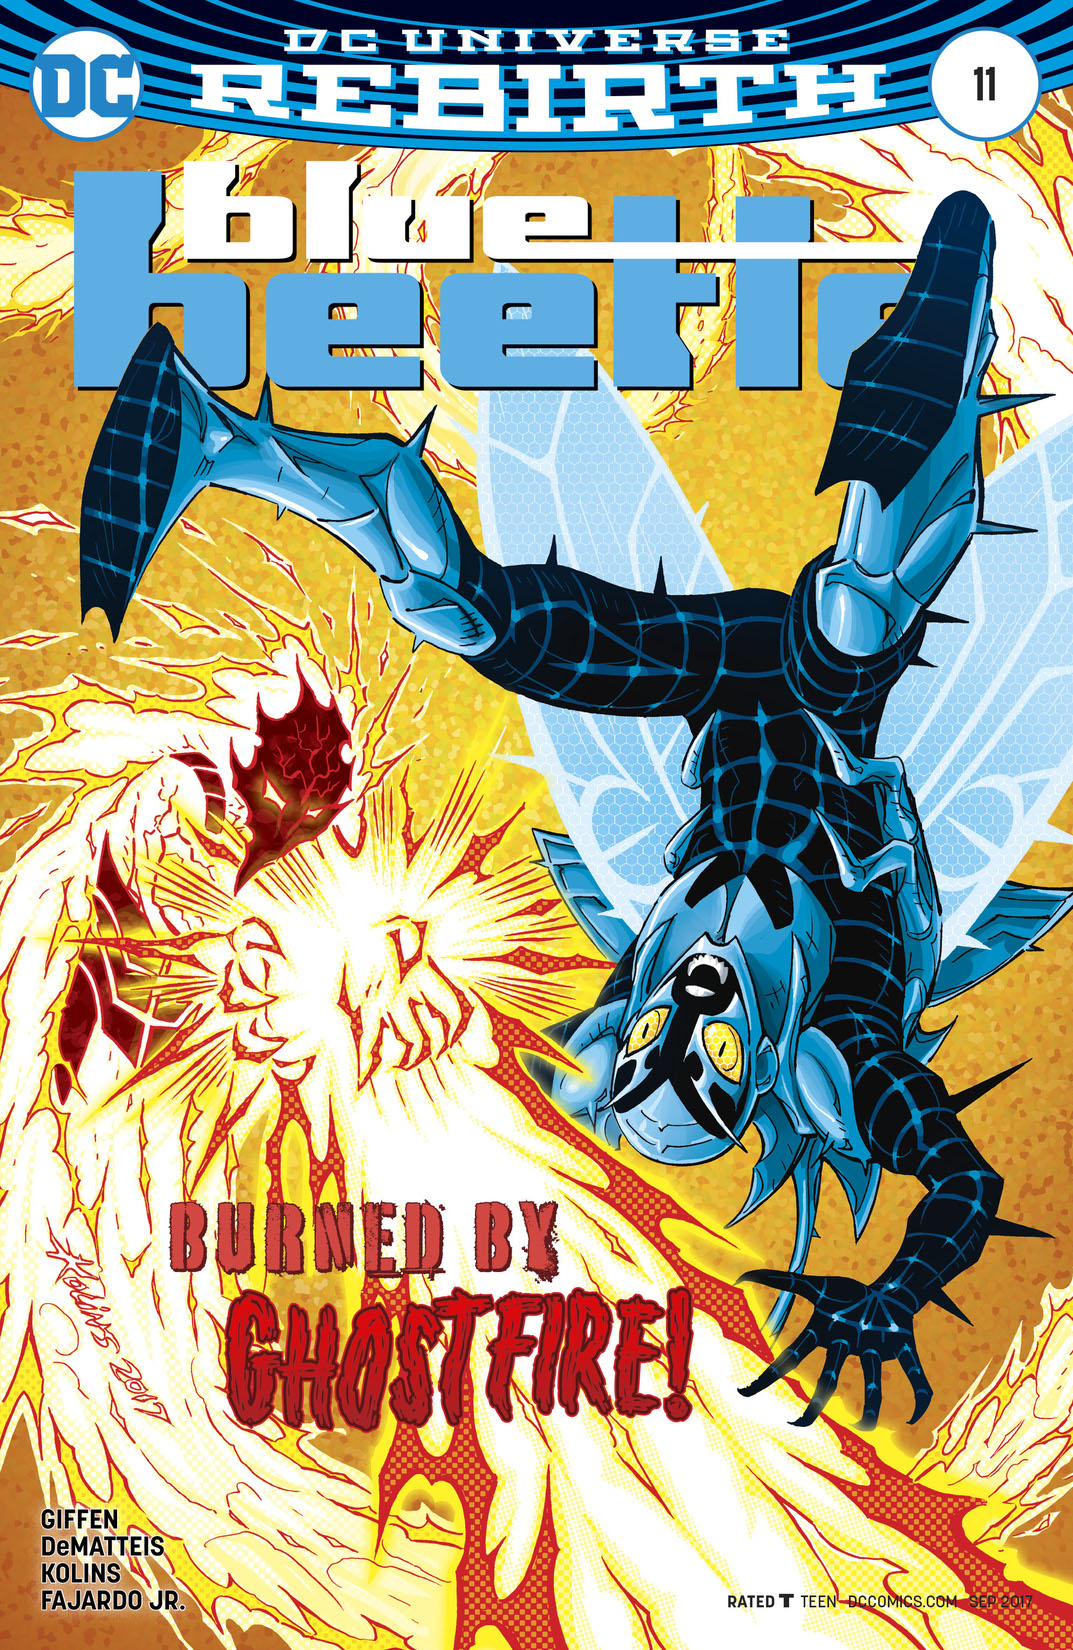 Blue Beetle (2016-) #11 preview images